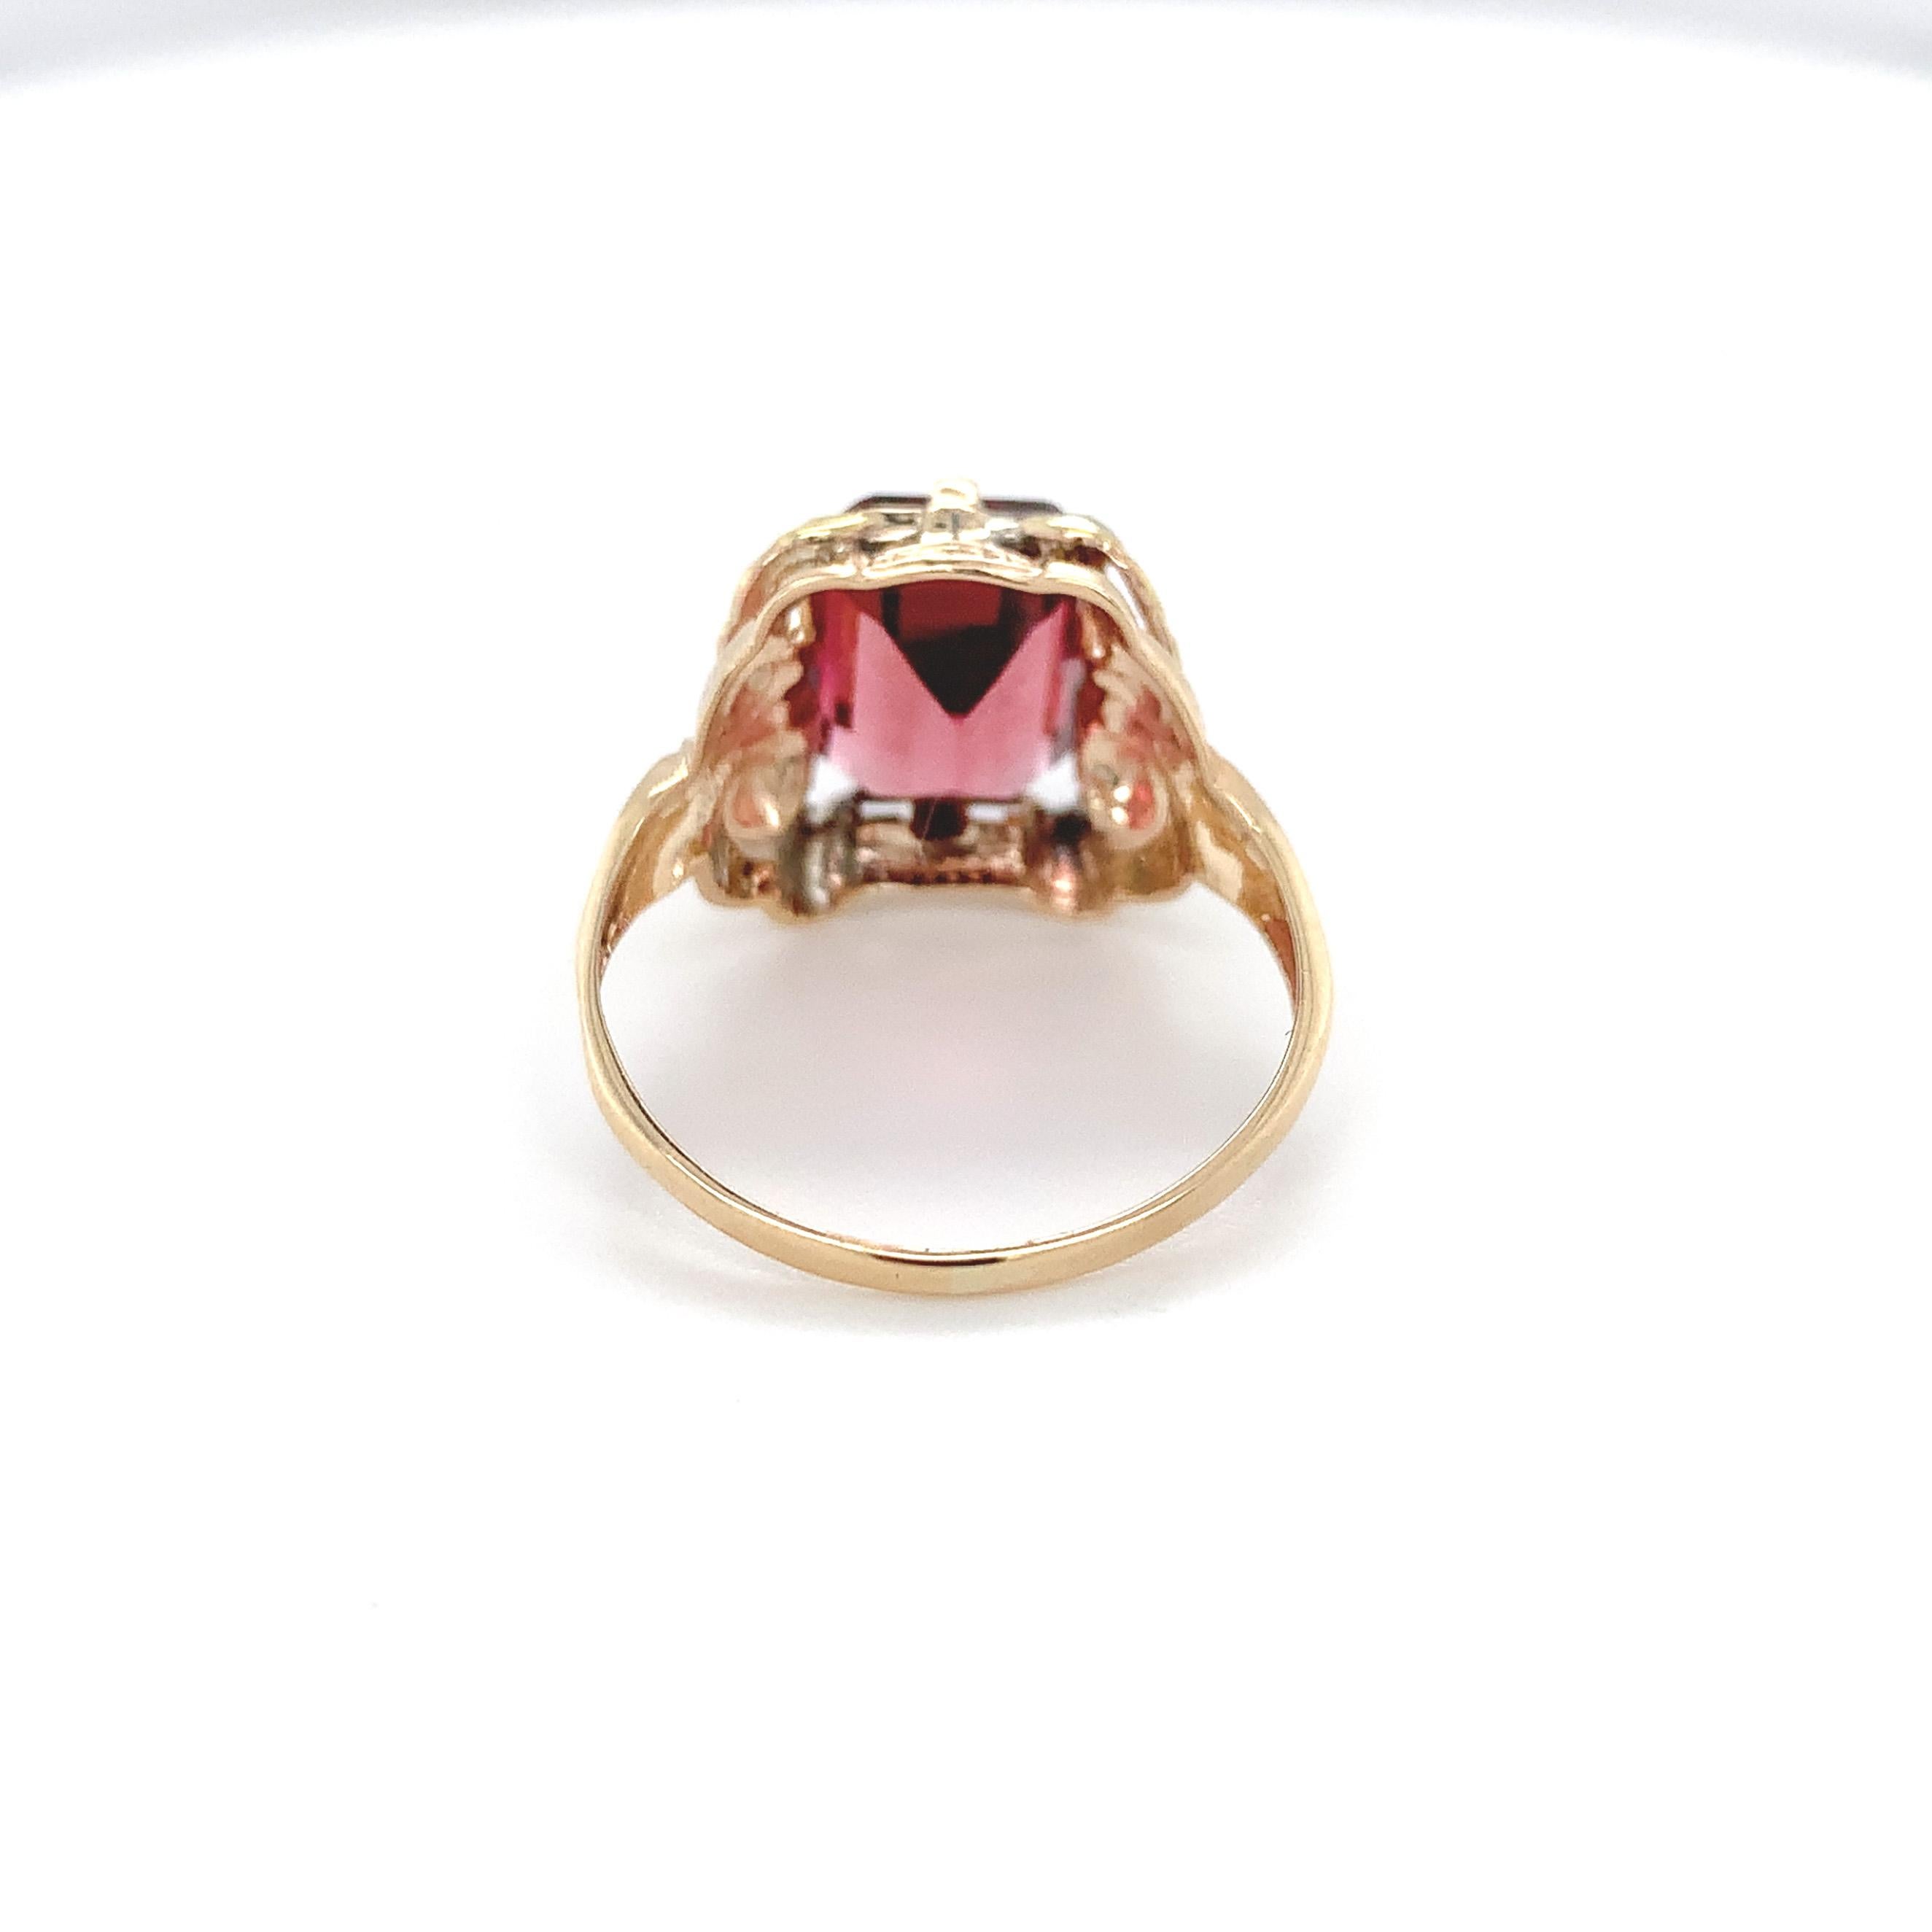 10K Rose Gold Filigree 3.80 carat Pink Tourmaline Ring In Good Condition For Sale In Big Bend, WI